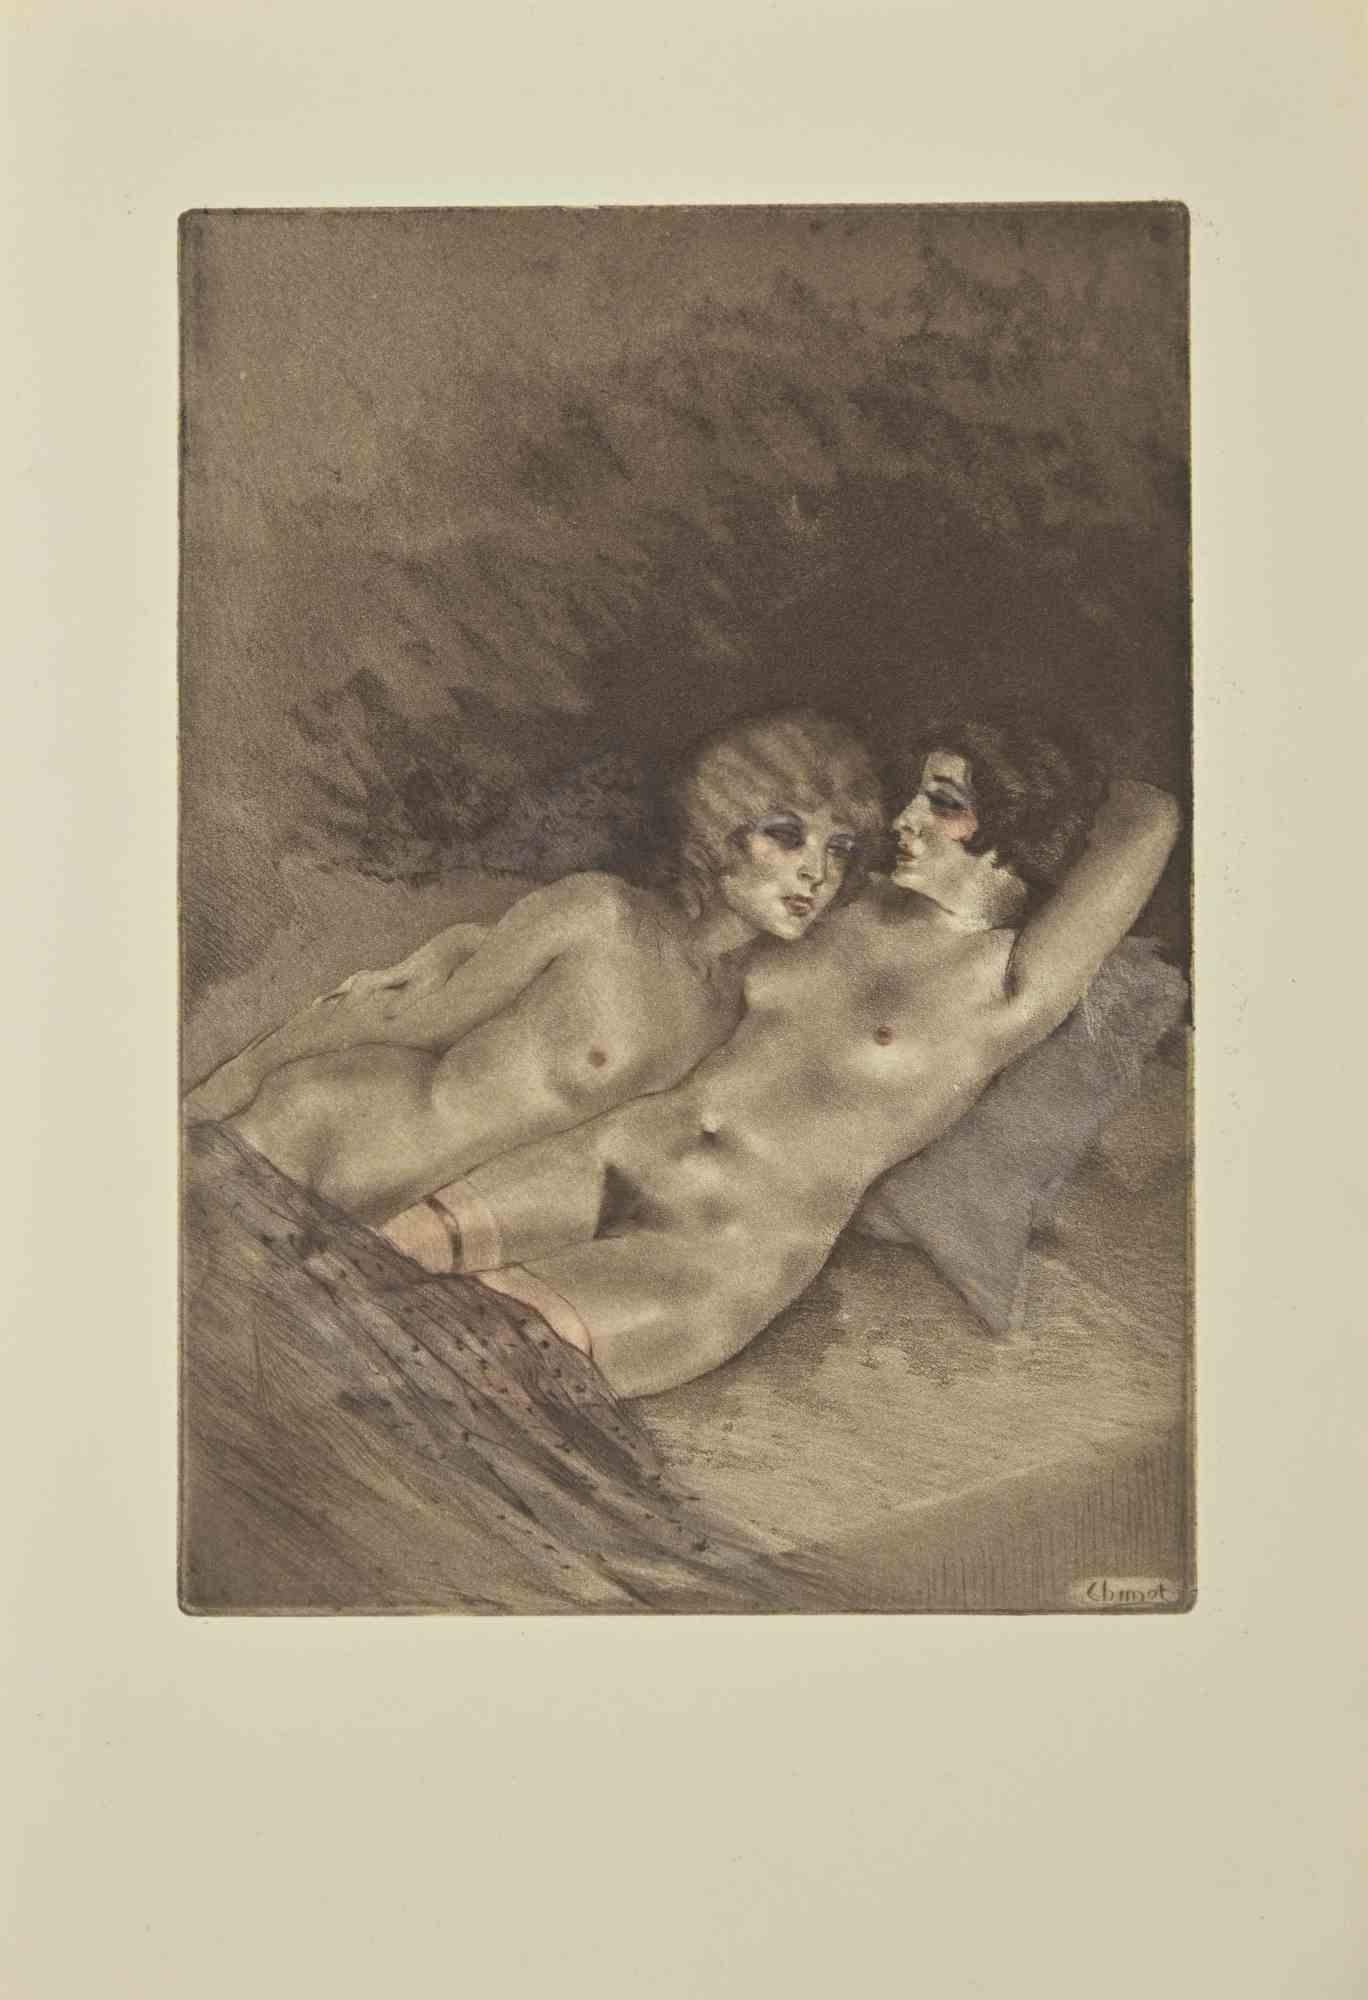 Couple is an etching realized by Edouard Chimot in the 1930s.

Signed on the plate by the artist on the lower right corner.

Good conditions.

Édouard Chimot (26 November 1880 – 7 June 1959) was a French artist, illustrator, and editor whose career